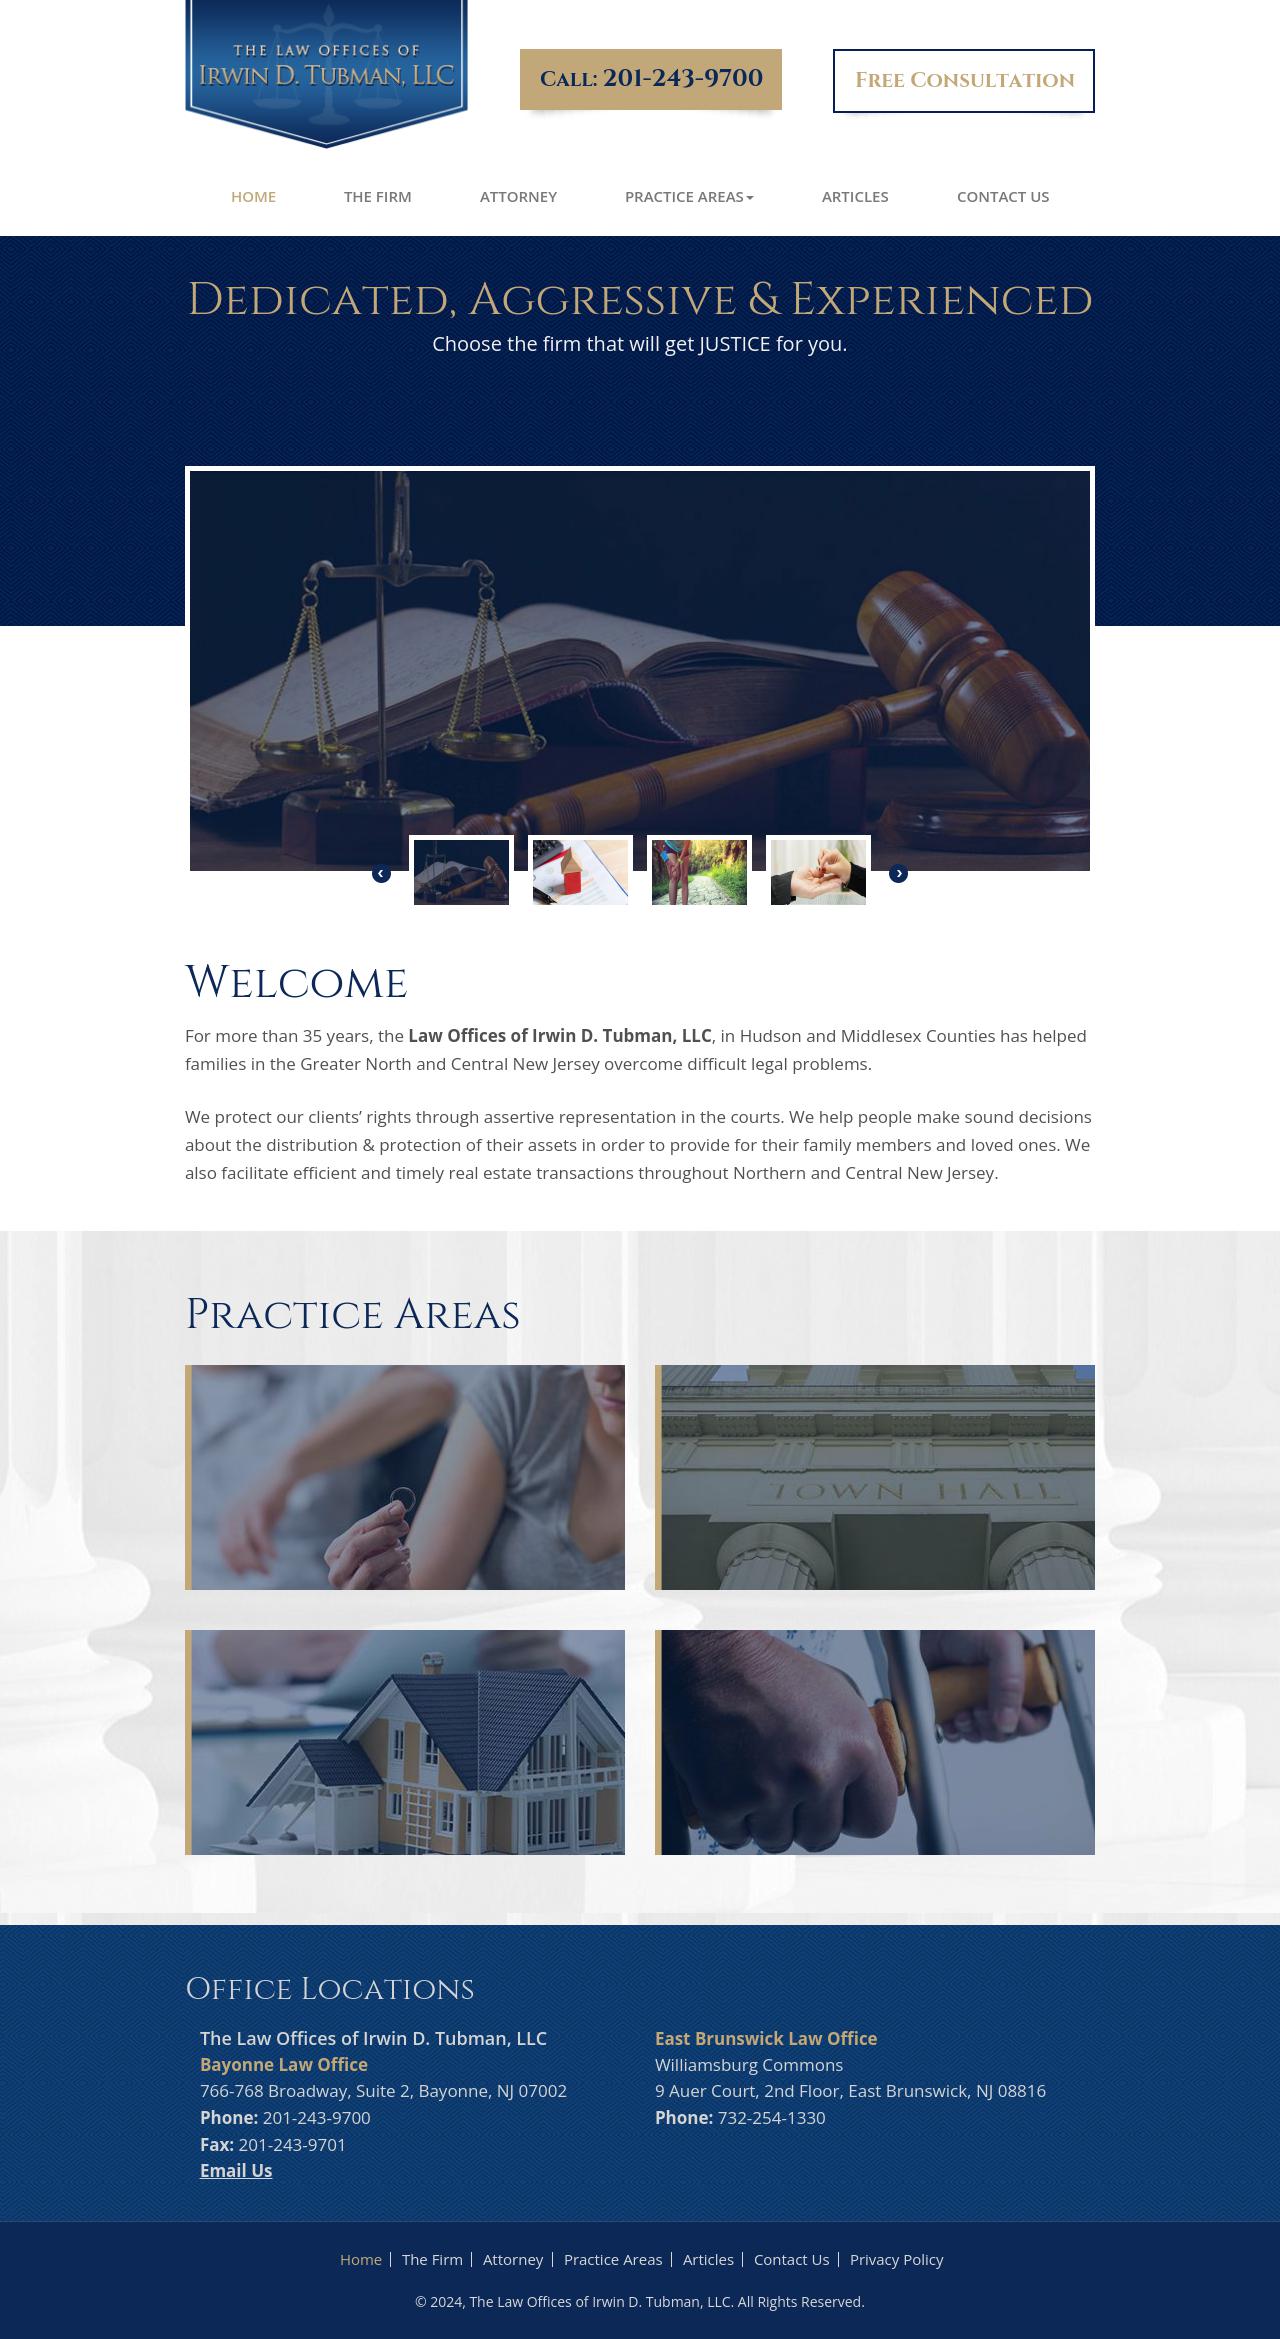 The Law Offices of Irwin D. Tubman, LLC - New York NY Lawyers